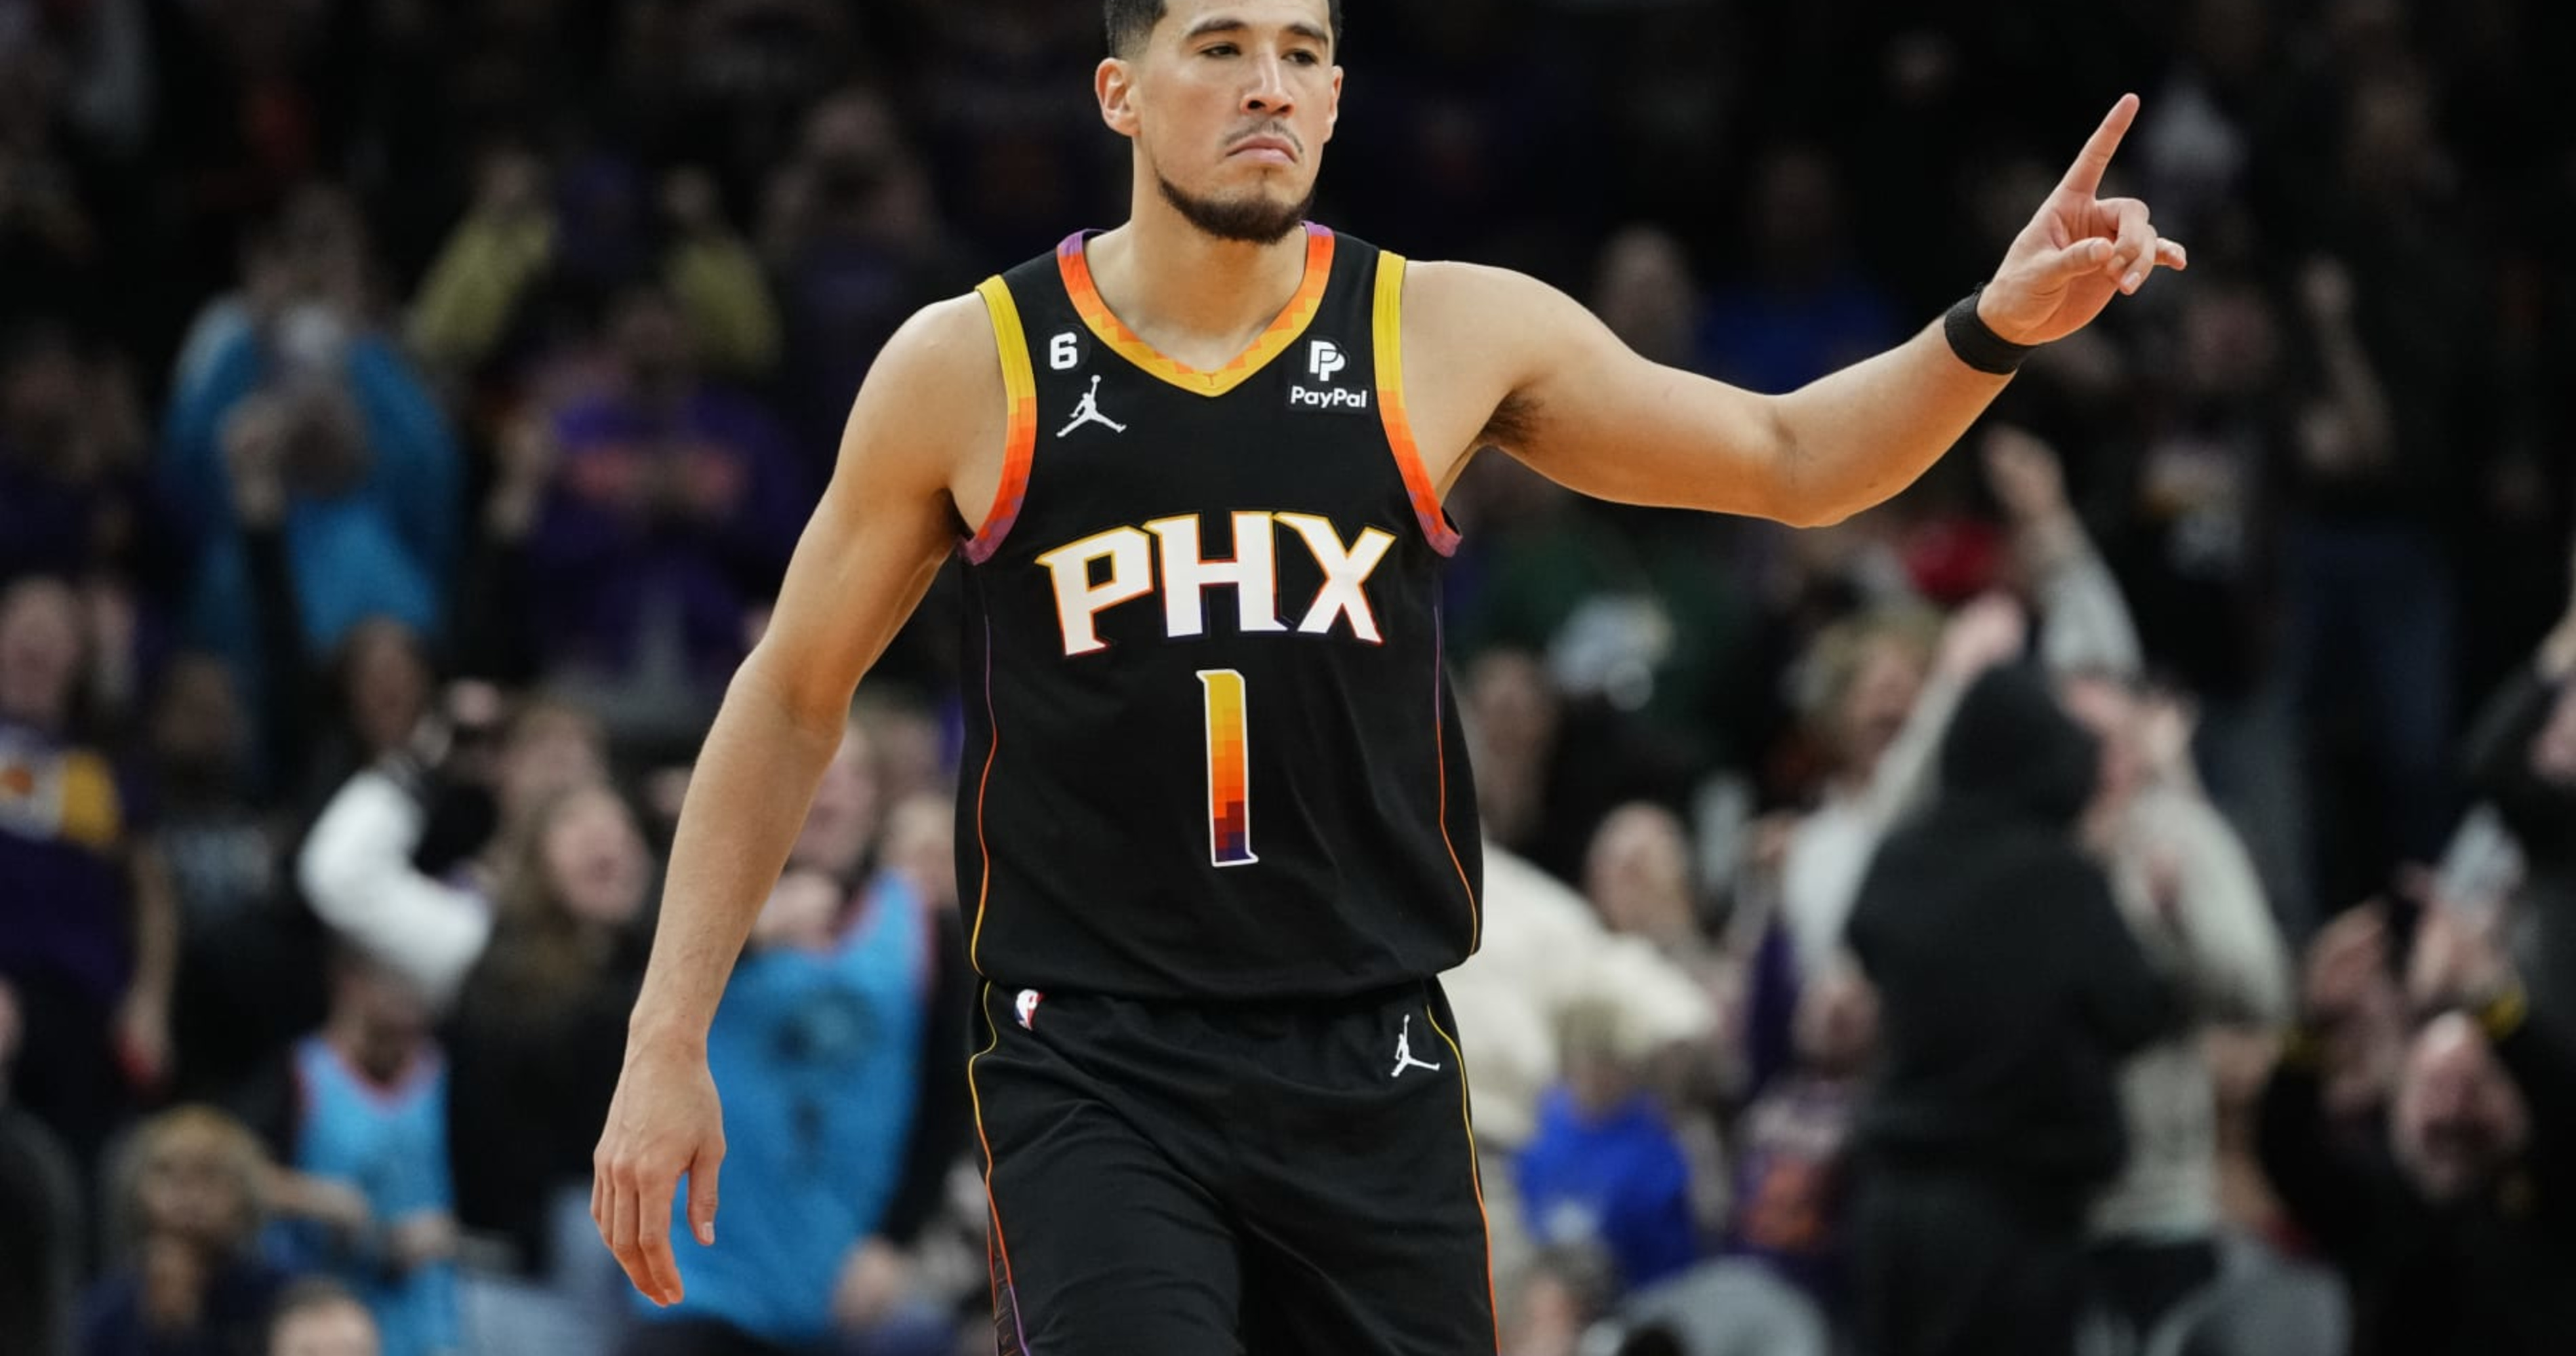 Suns guard Devin Booker out vs. Pelicans due to hamstring tightness